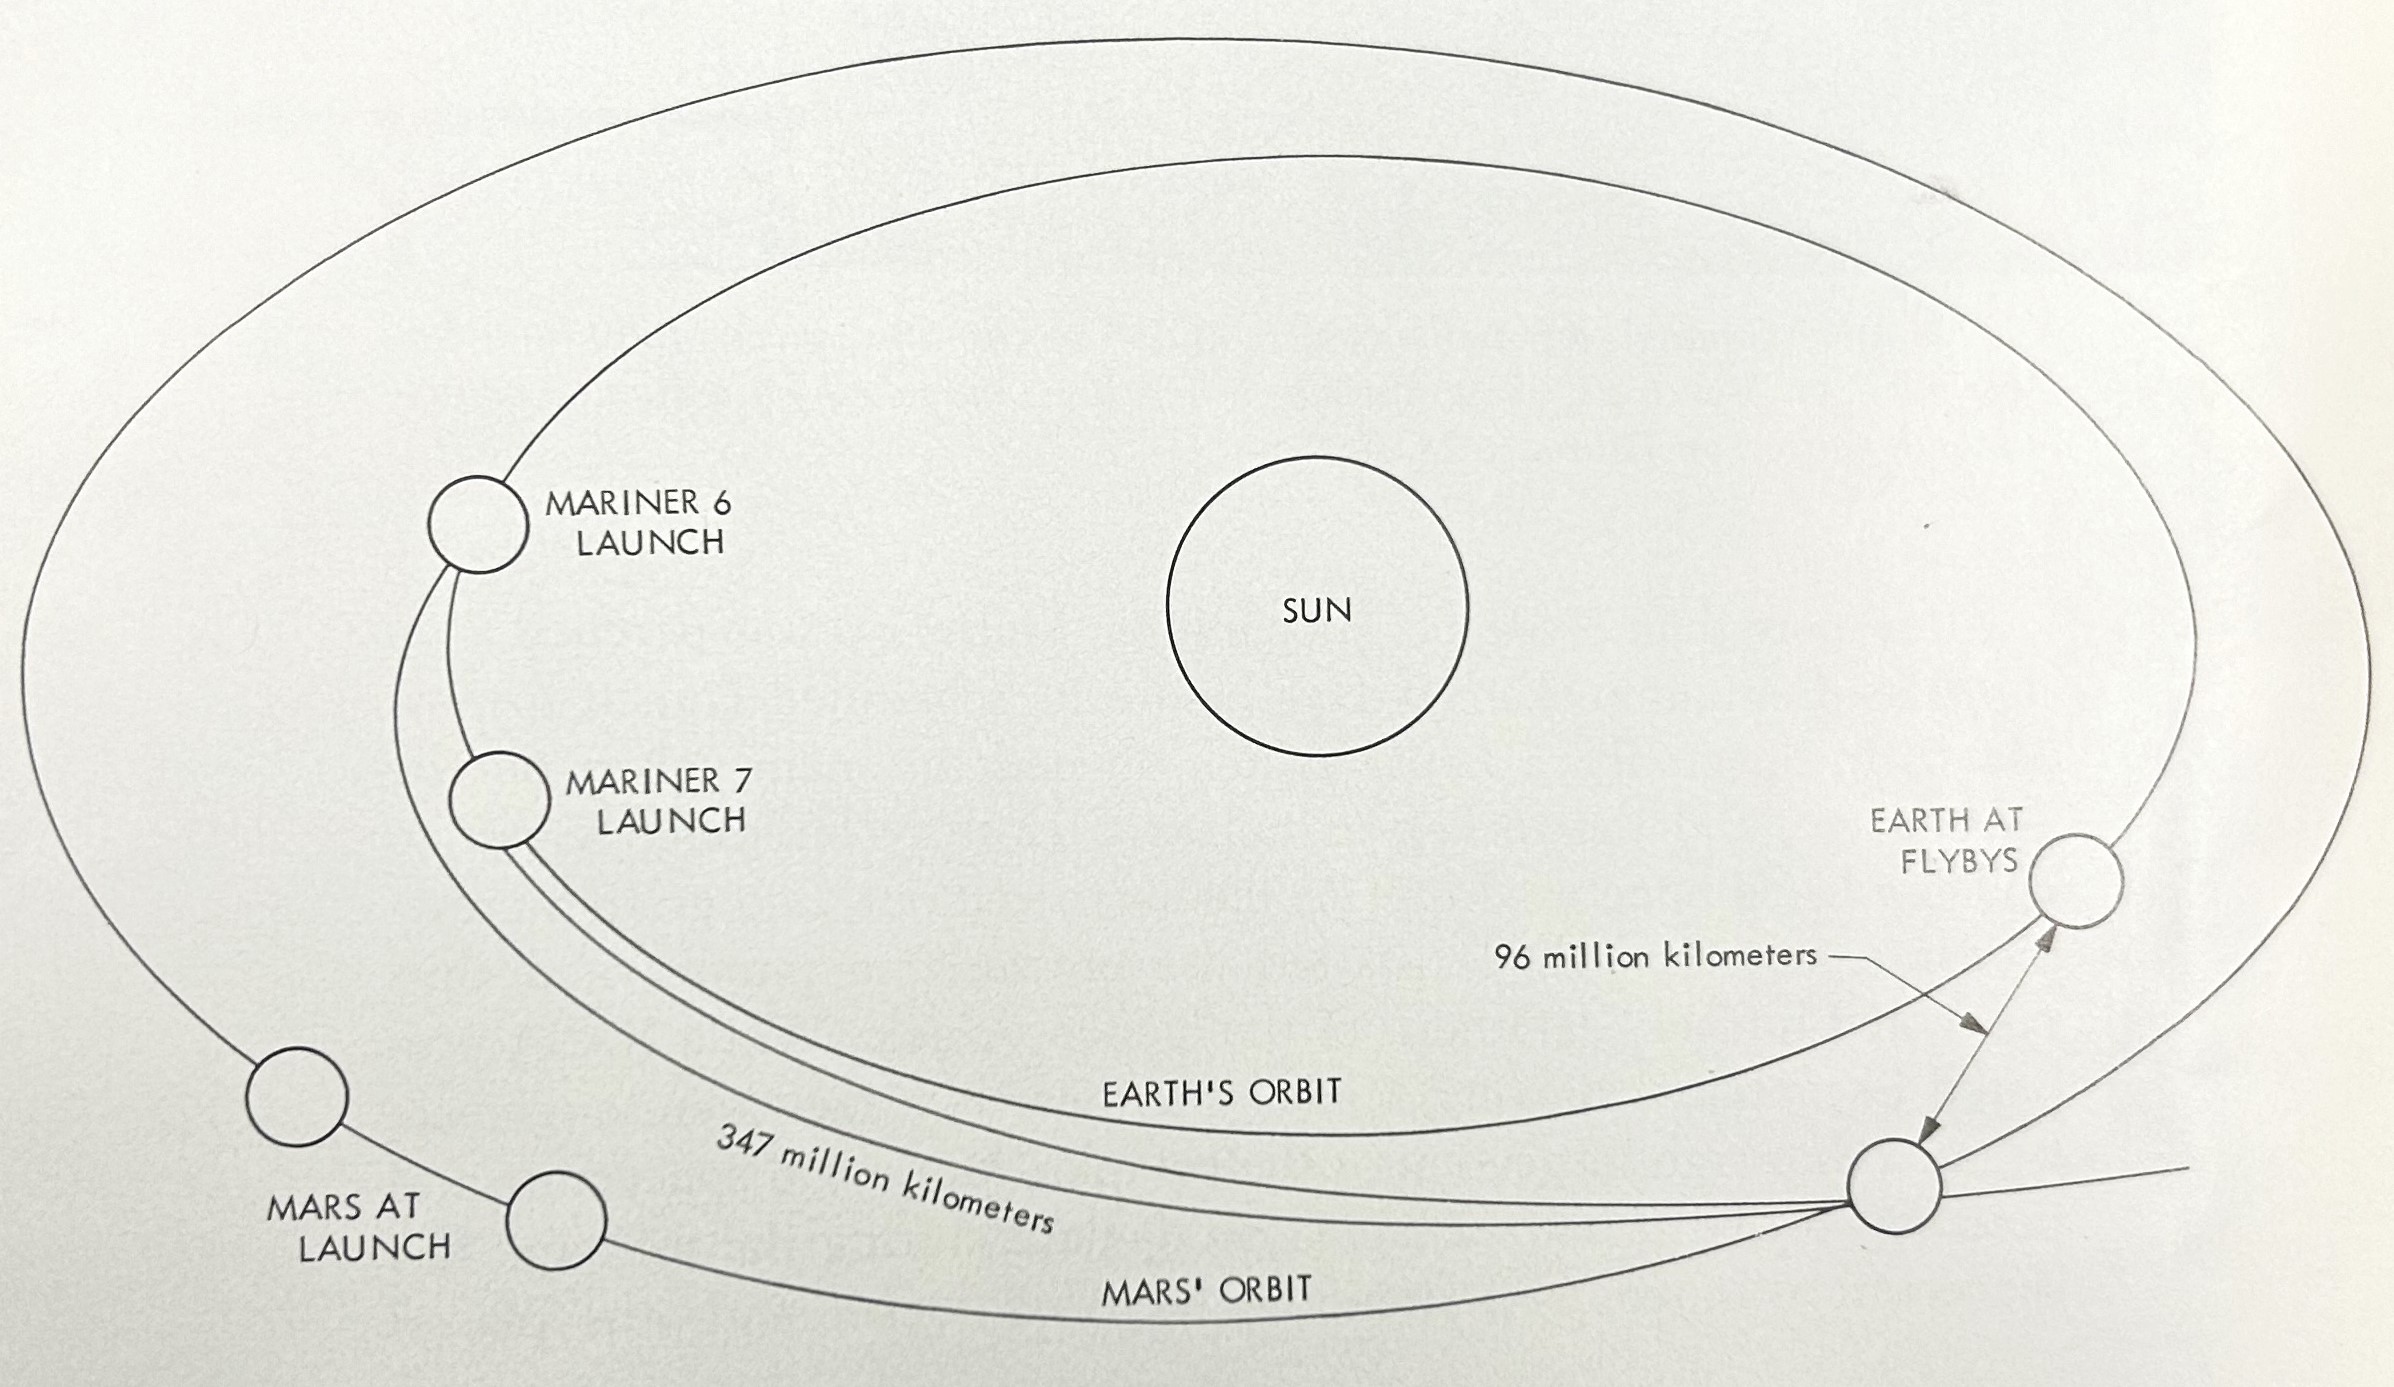 Trajectories of Mariner 6 and 7 from Earth to Mars